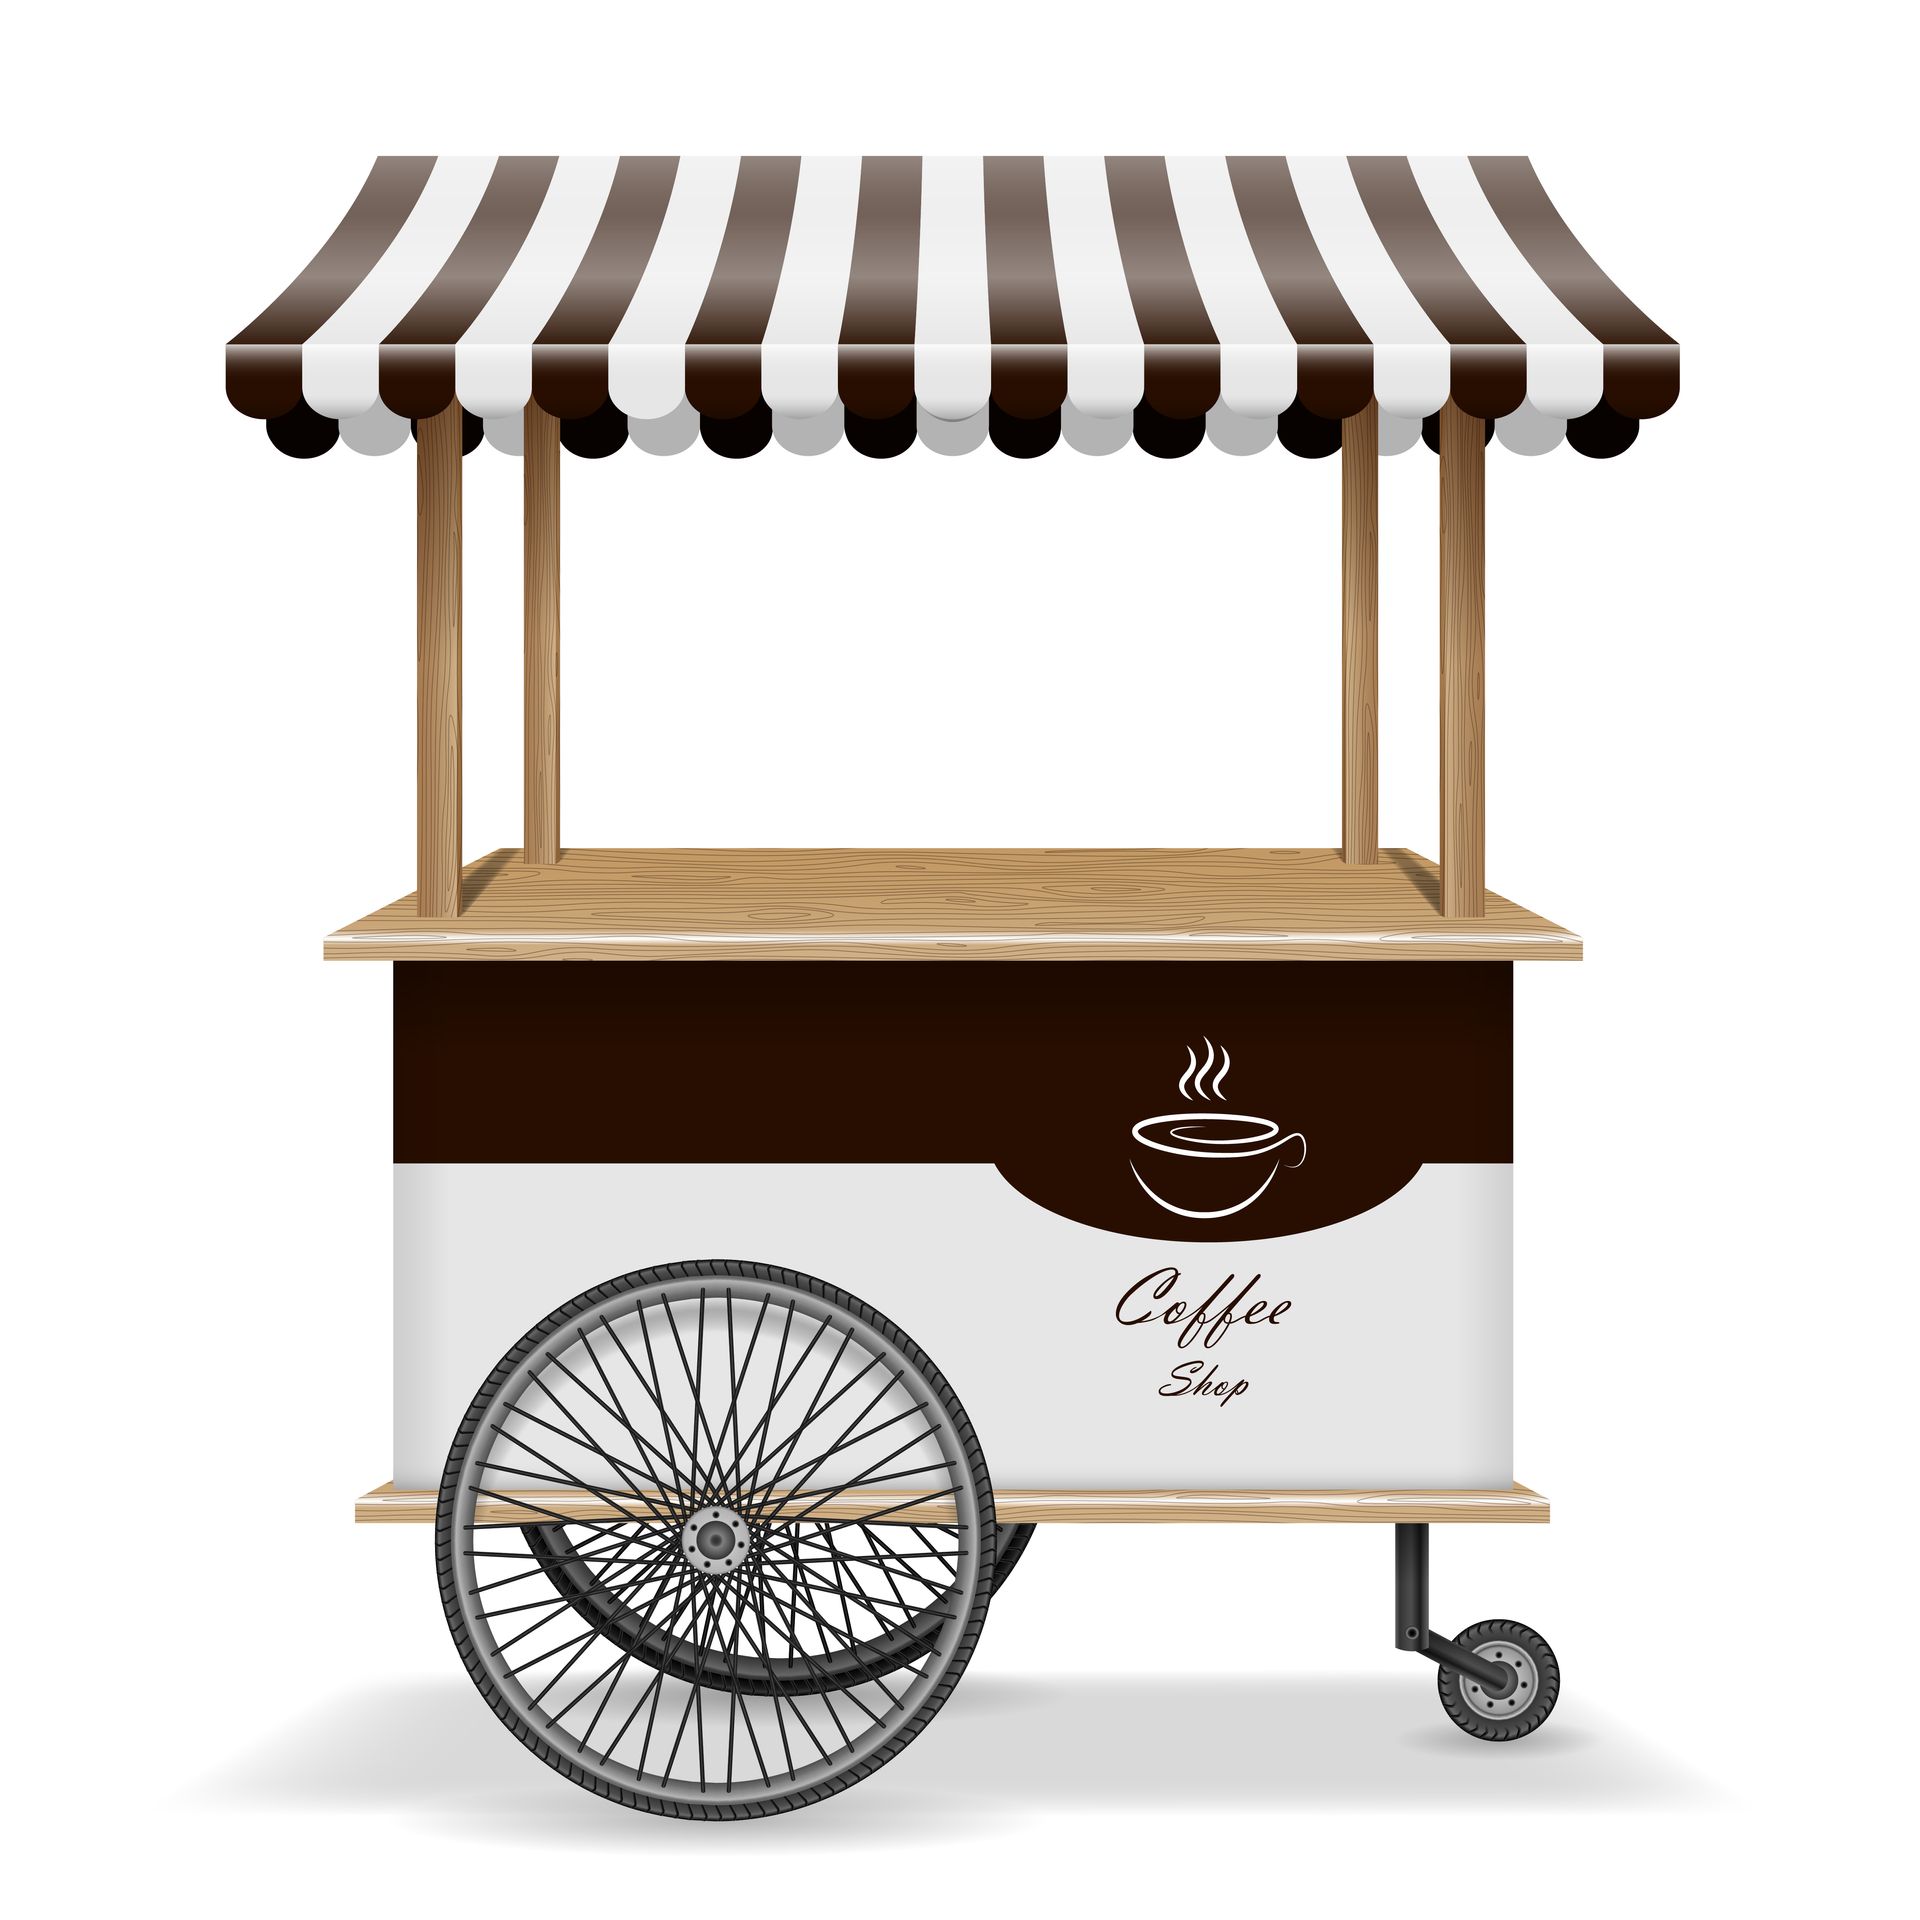 A coffee cart with a striped awning and a cup of coffee on it.